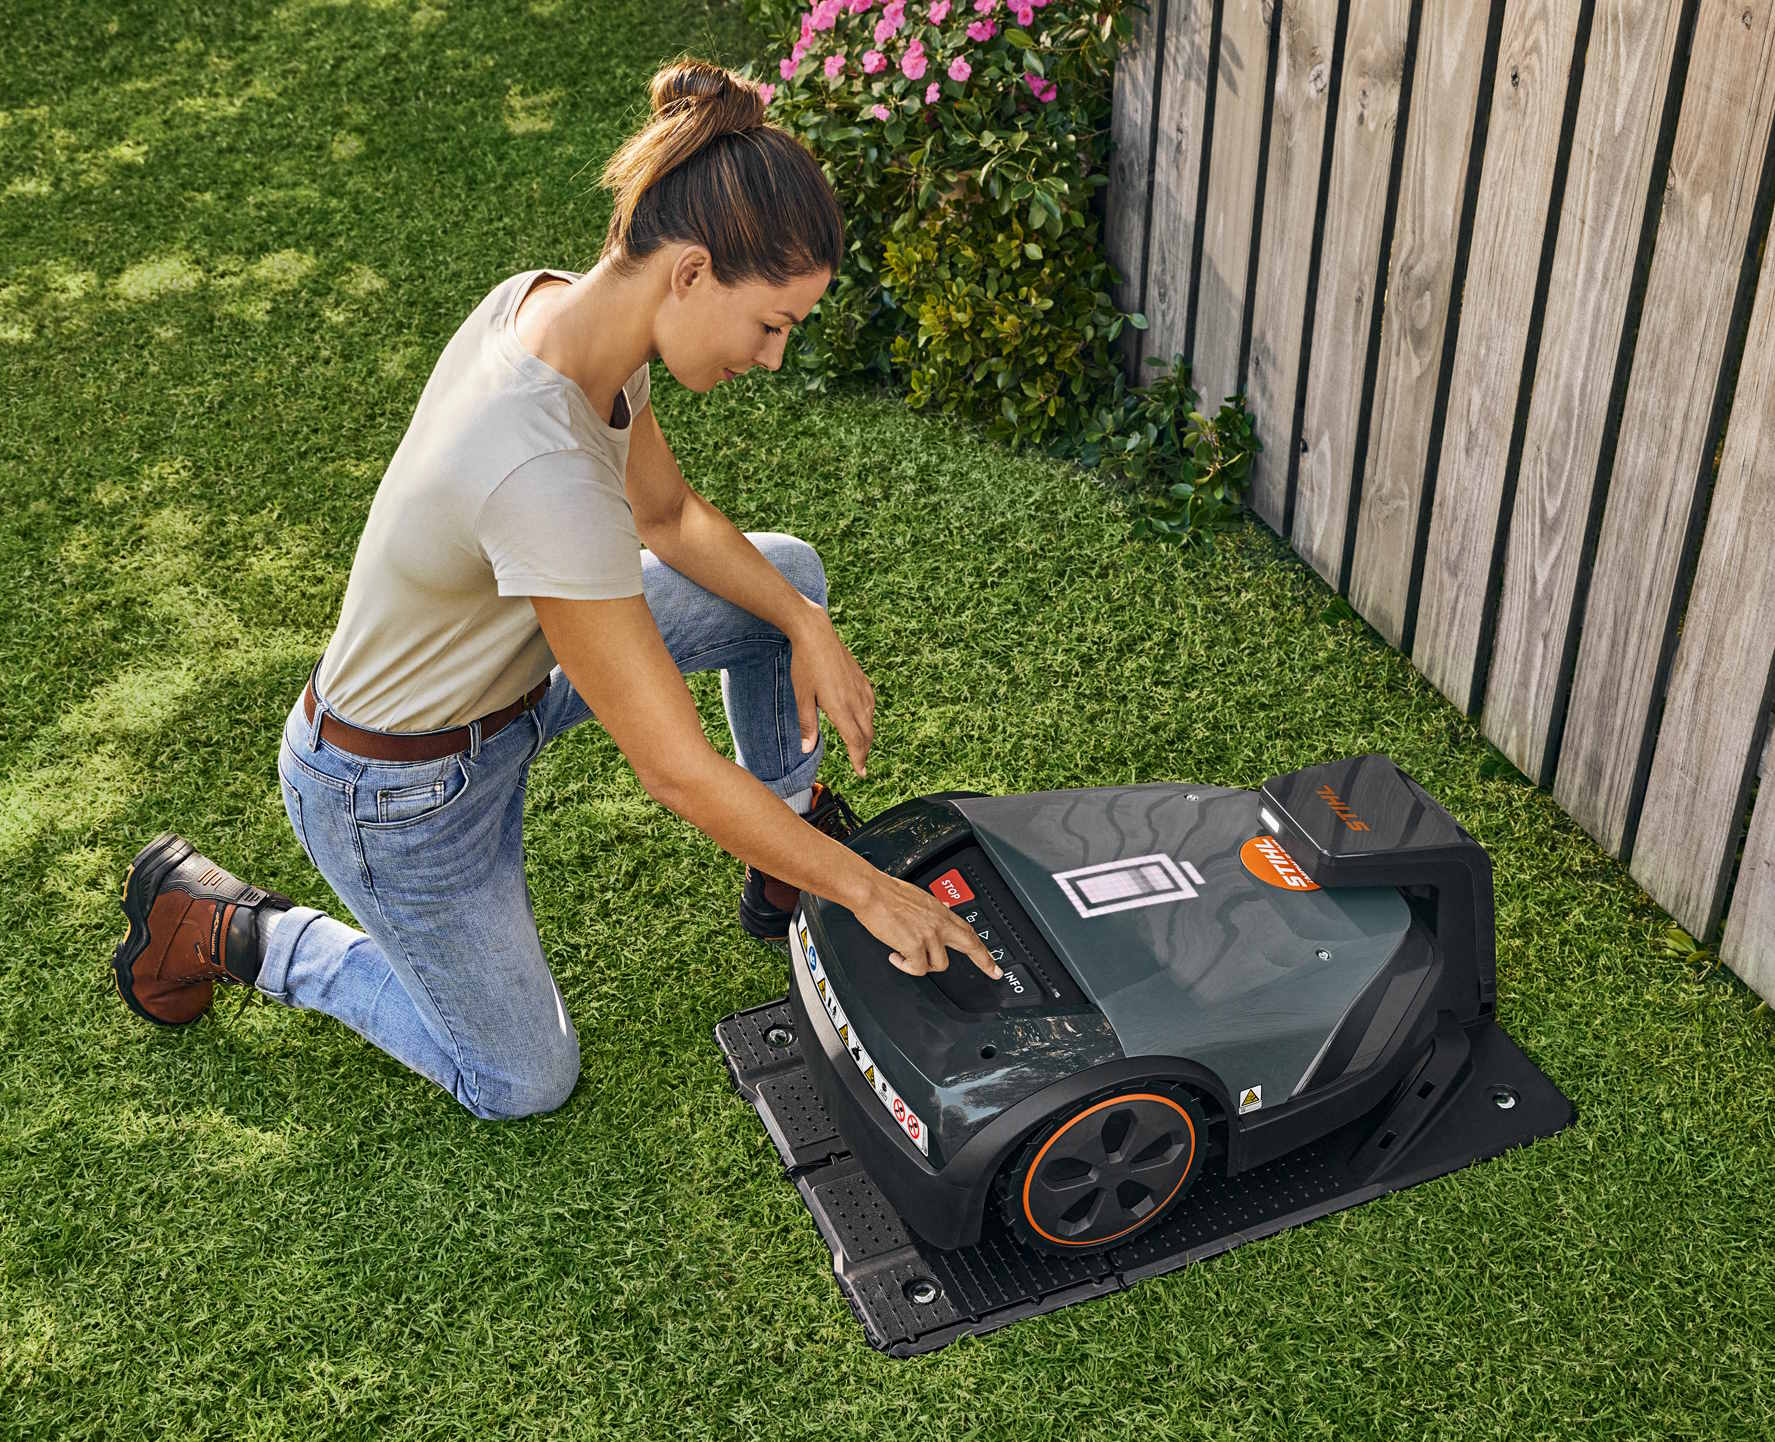 iMOW new robot lawn mower pricing unveiled - NotebookCheck.net News